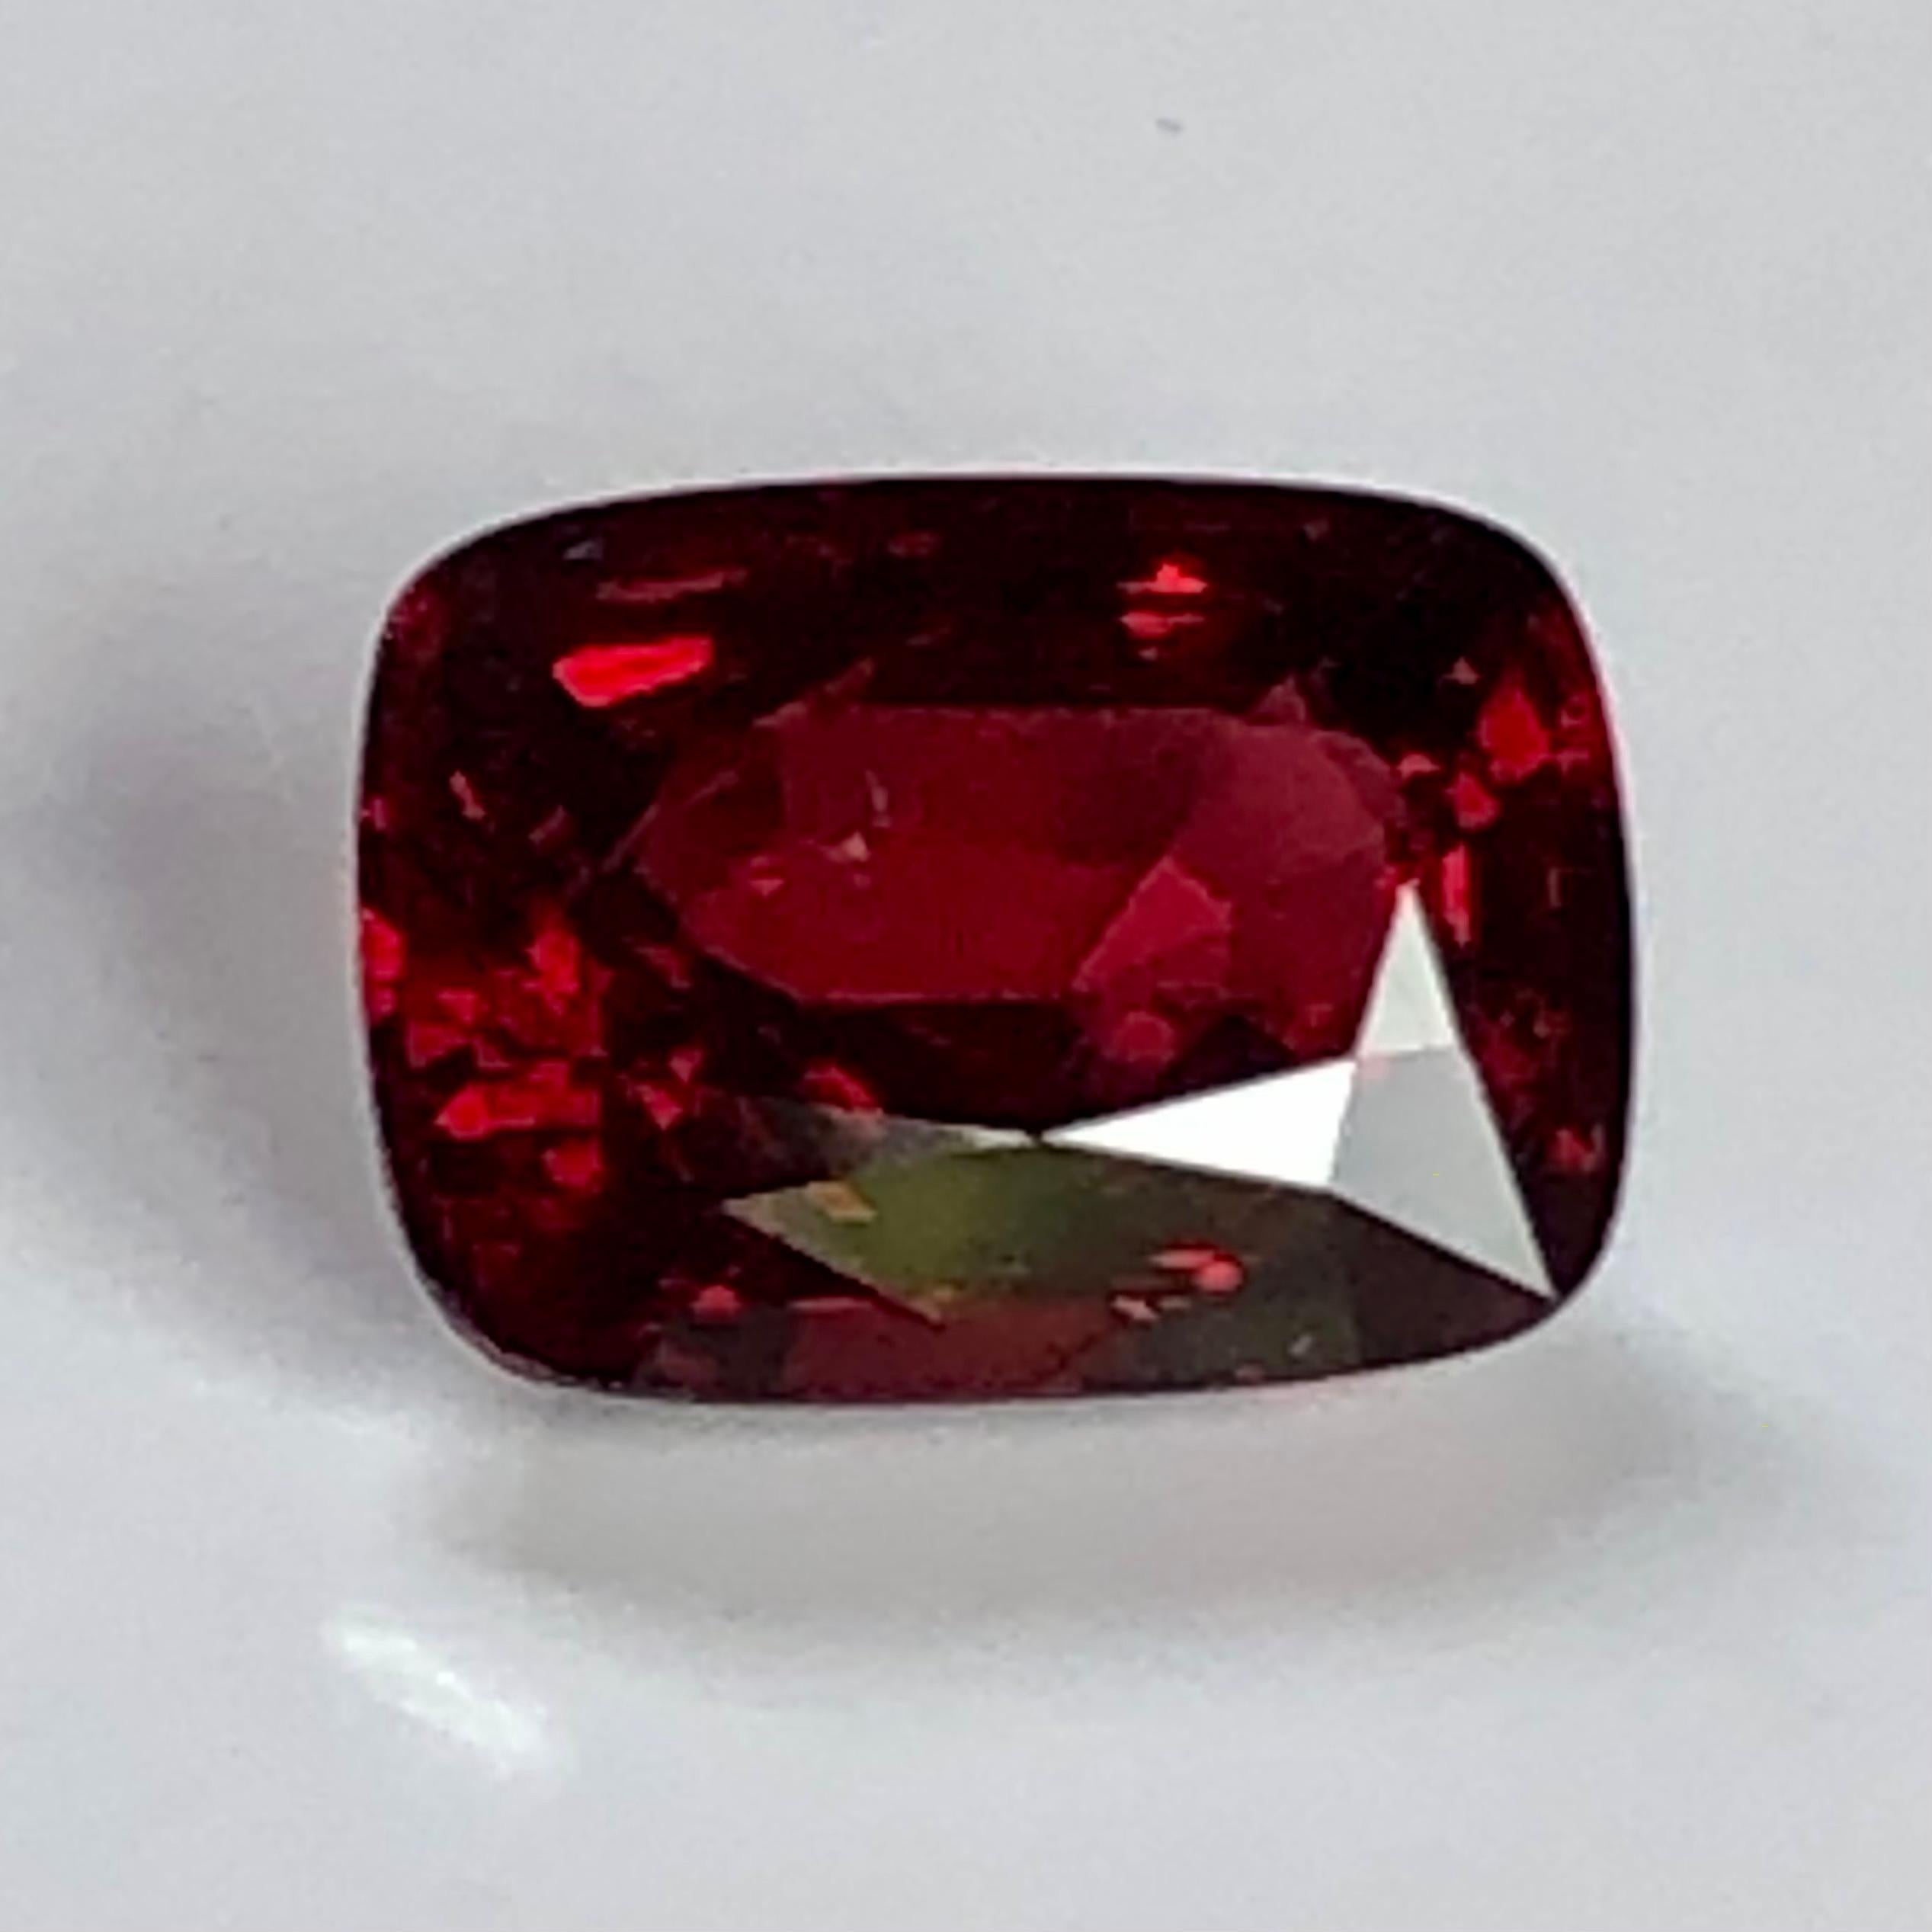 3.14 Carat Red Cushion Cut No Heat Burmese Spinel Certified  For Sale 4